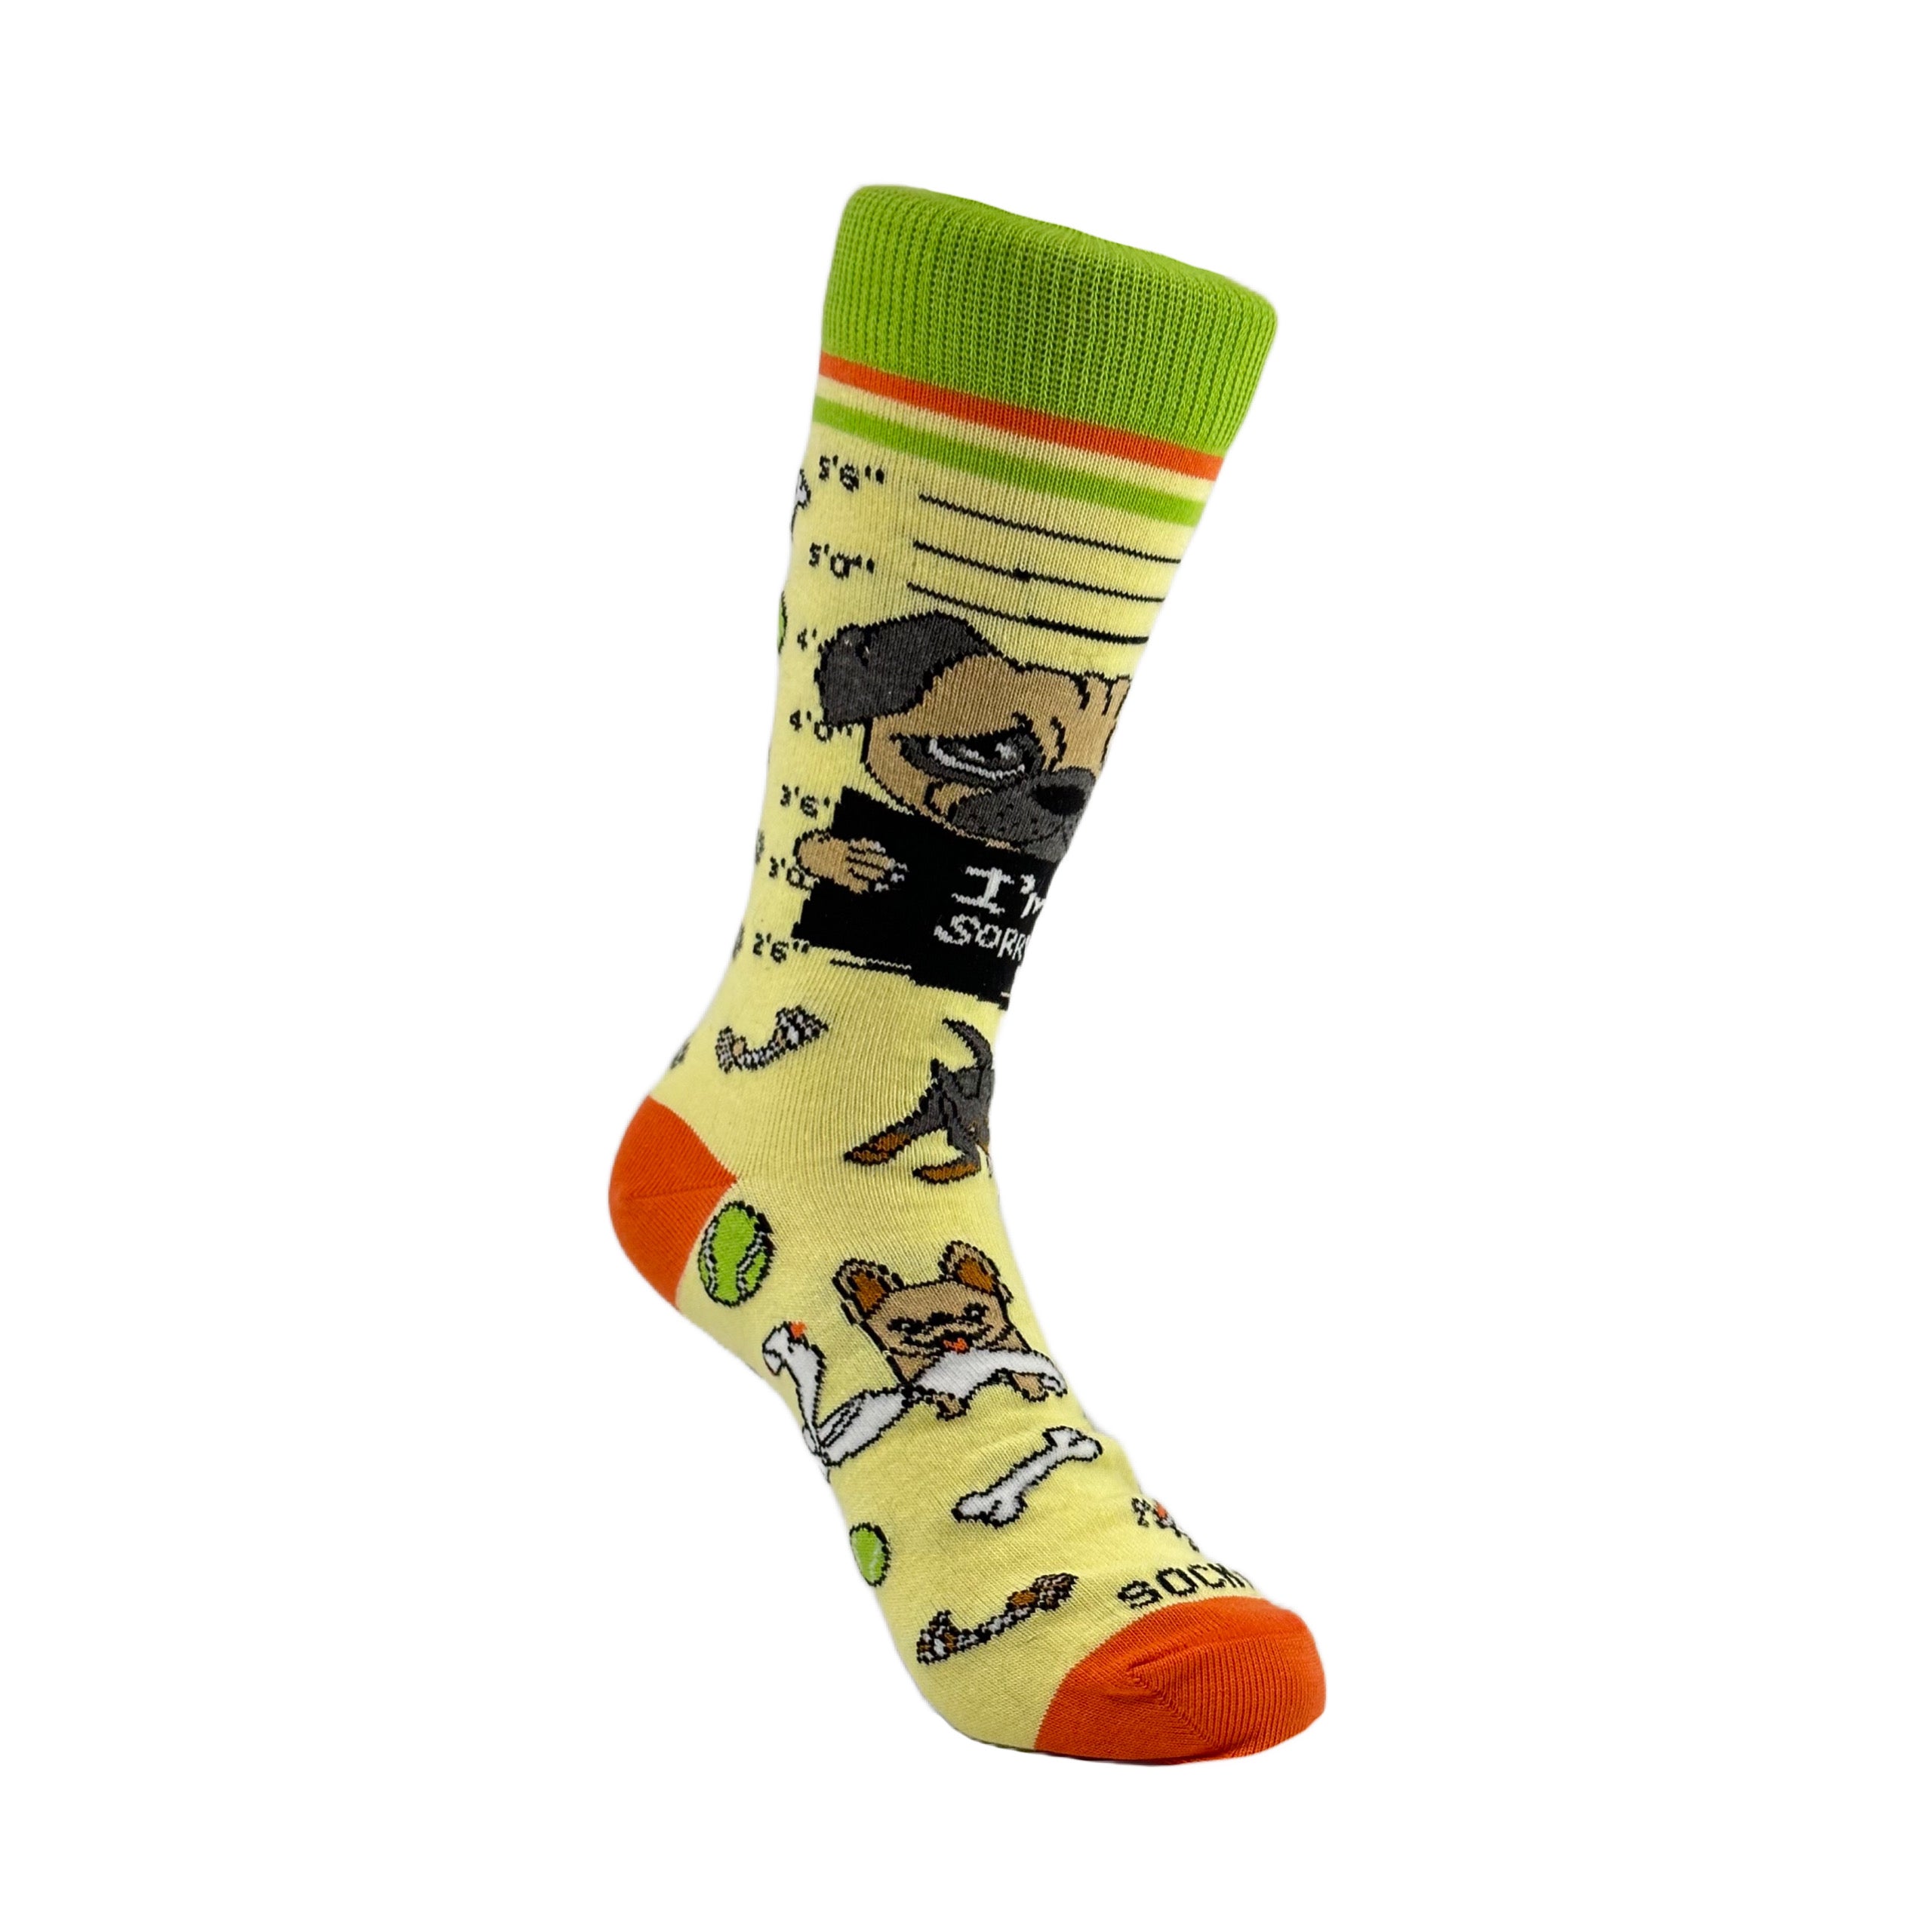 Bad and Guilty Dog Socks from the Sock Panda (Adult Small)